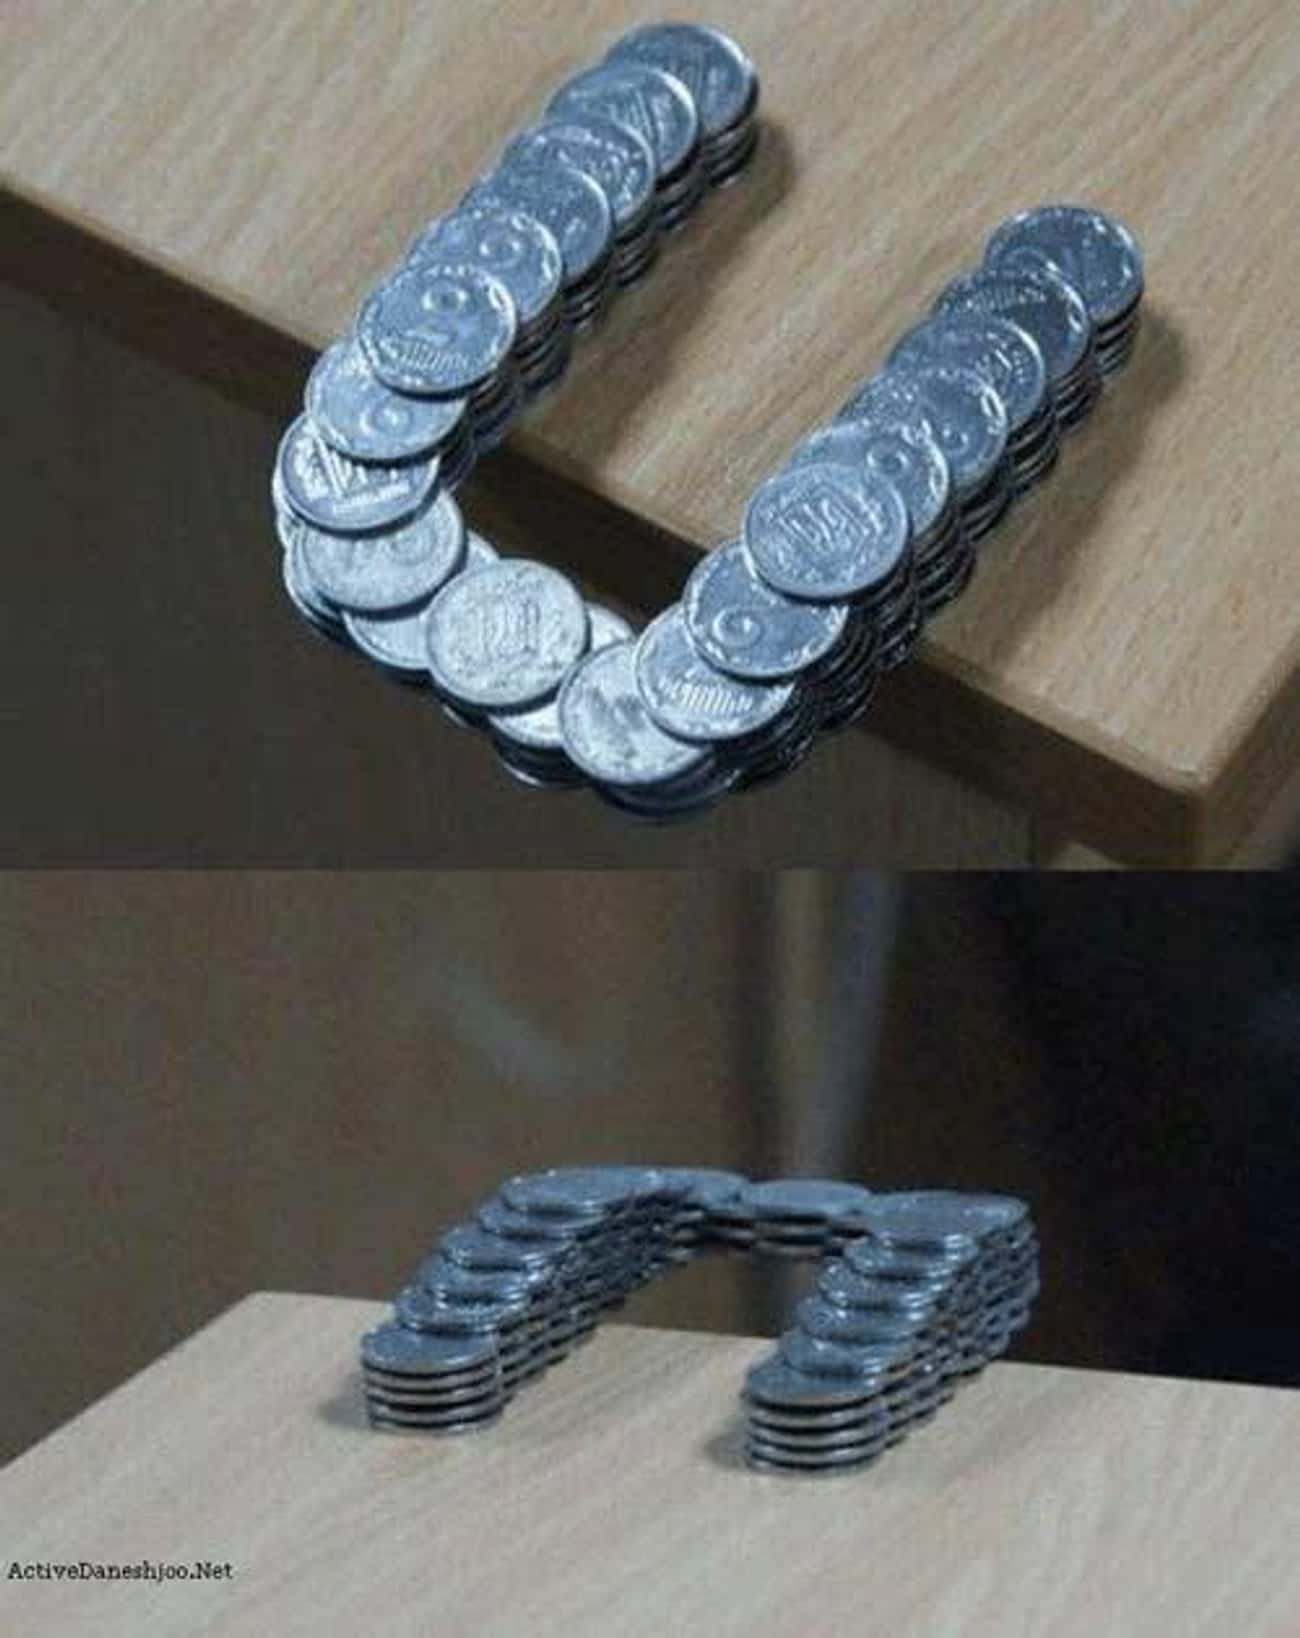 Coins Stacked Past The Edge Of The Table